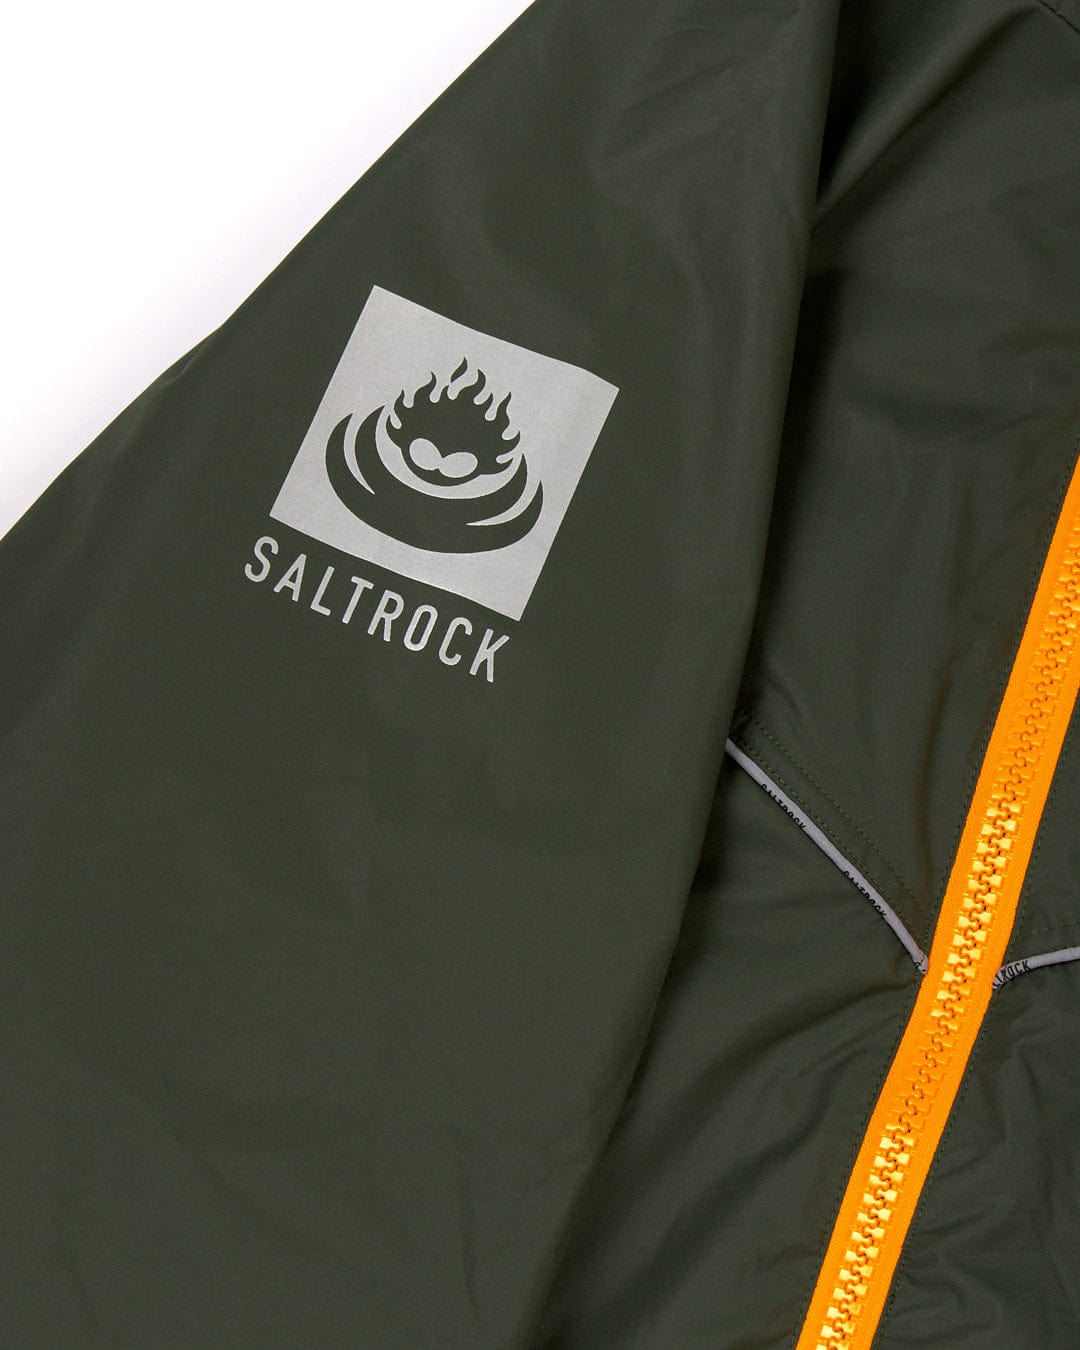 Green Recycled Four Seasons Changing Robe with Saltrock logo, orange zipper detail, and fleece lining.